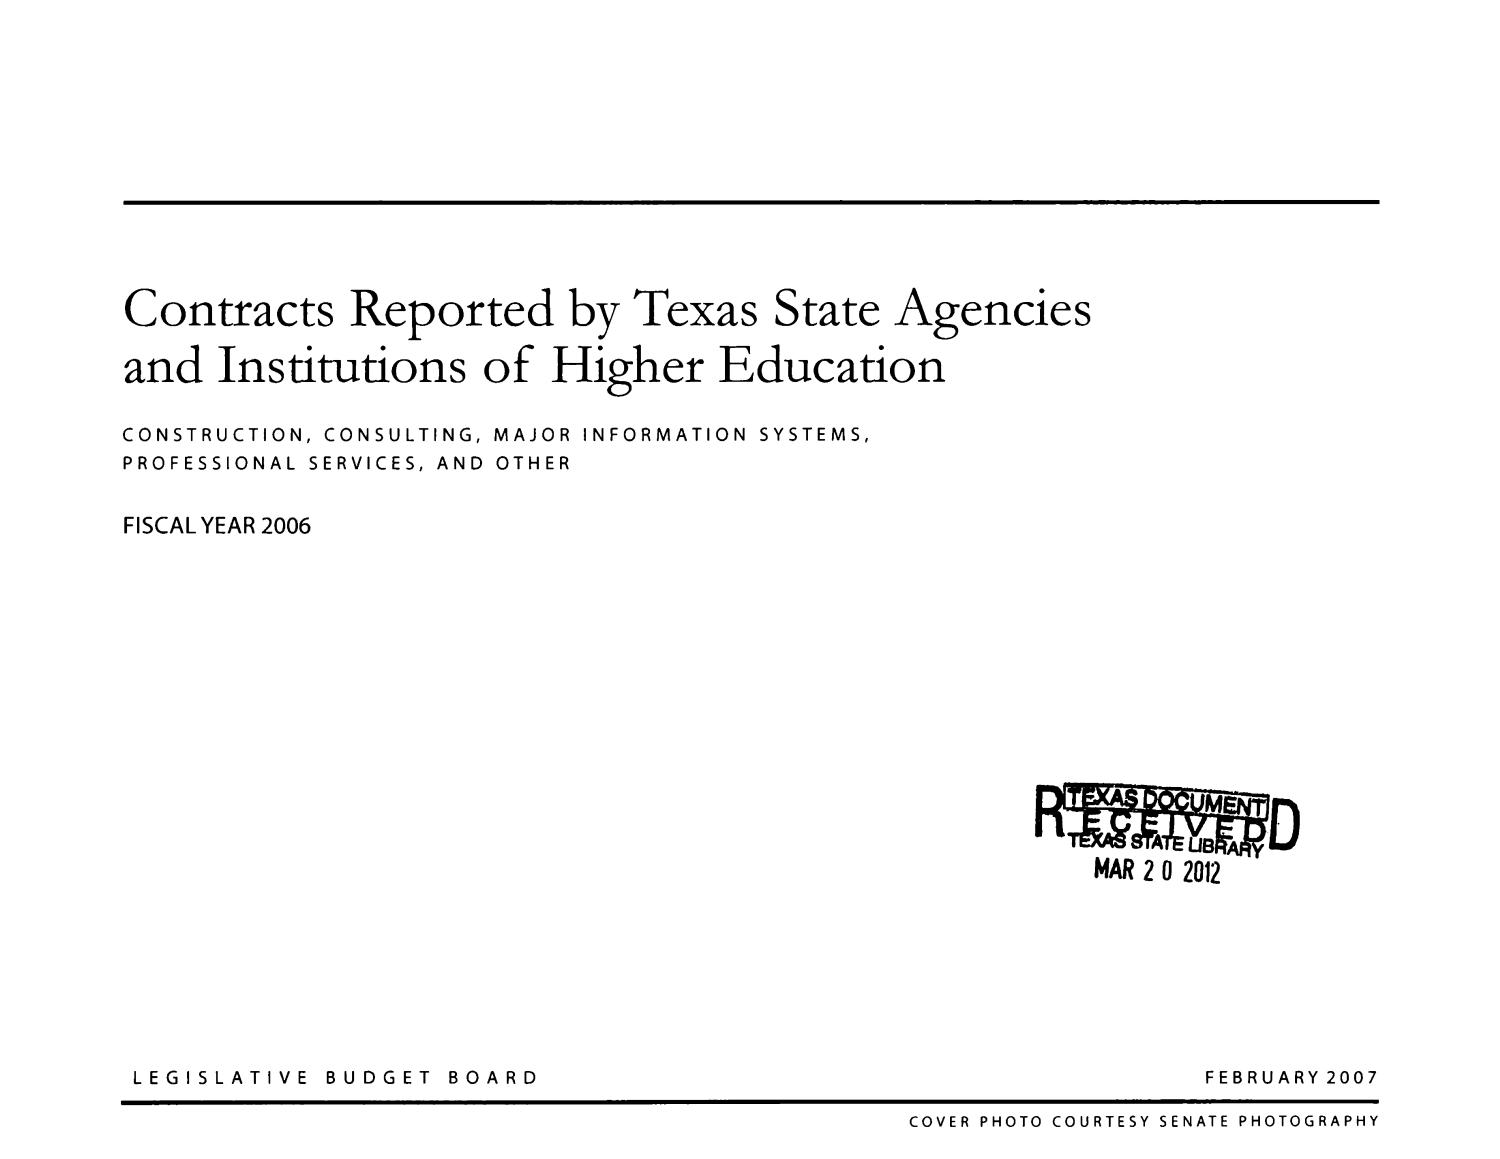 Contracts Reported by Texas State Agencies and Institutions of Higher Education: 2006
                                                
                                                    I
                                                